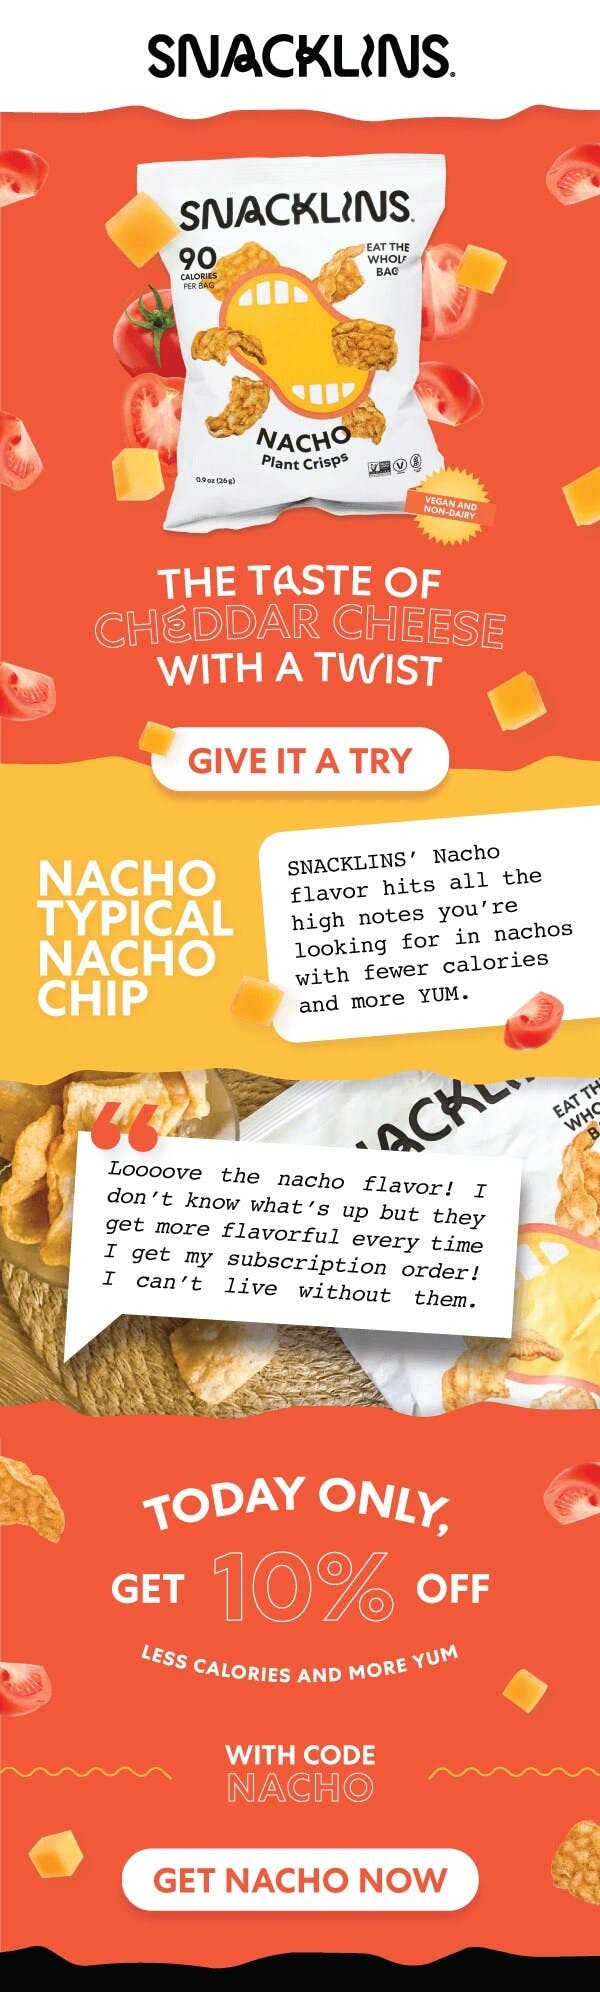 Graphic design and copywriting content kit we made for a SNACKLINS email campaign about a unique ways to interact with their product